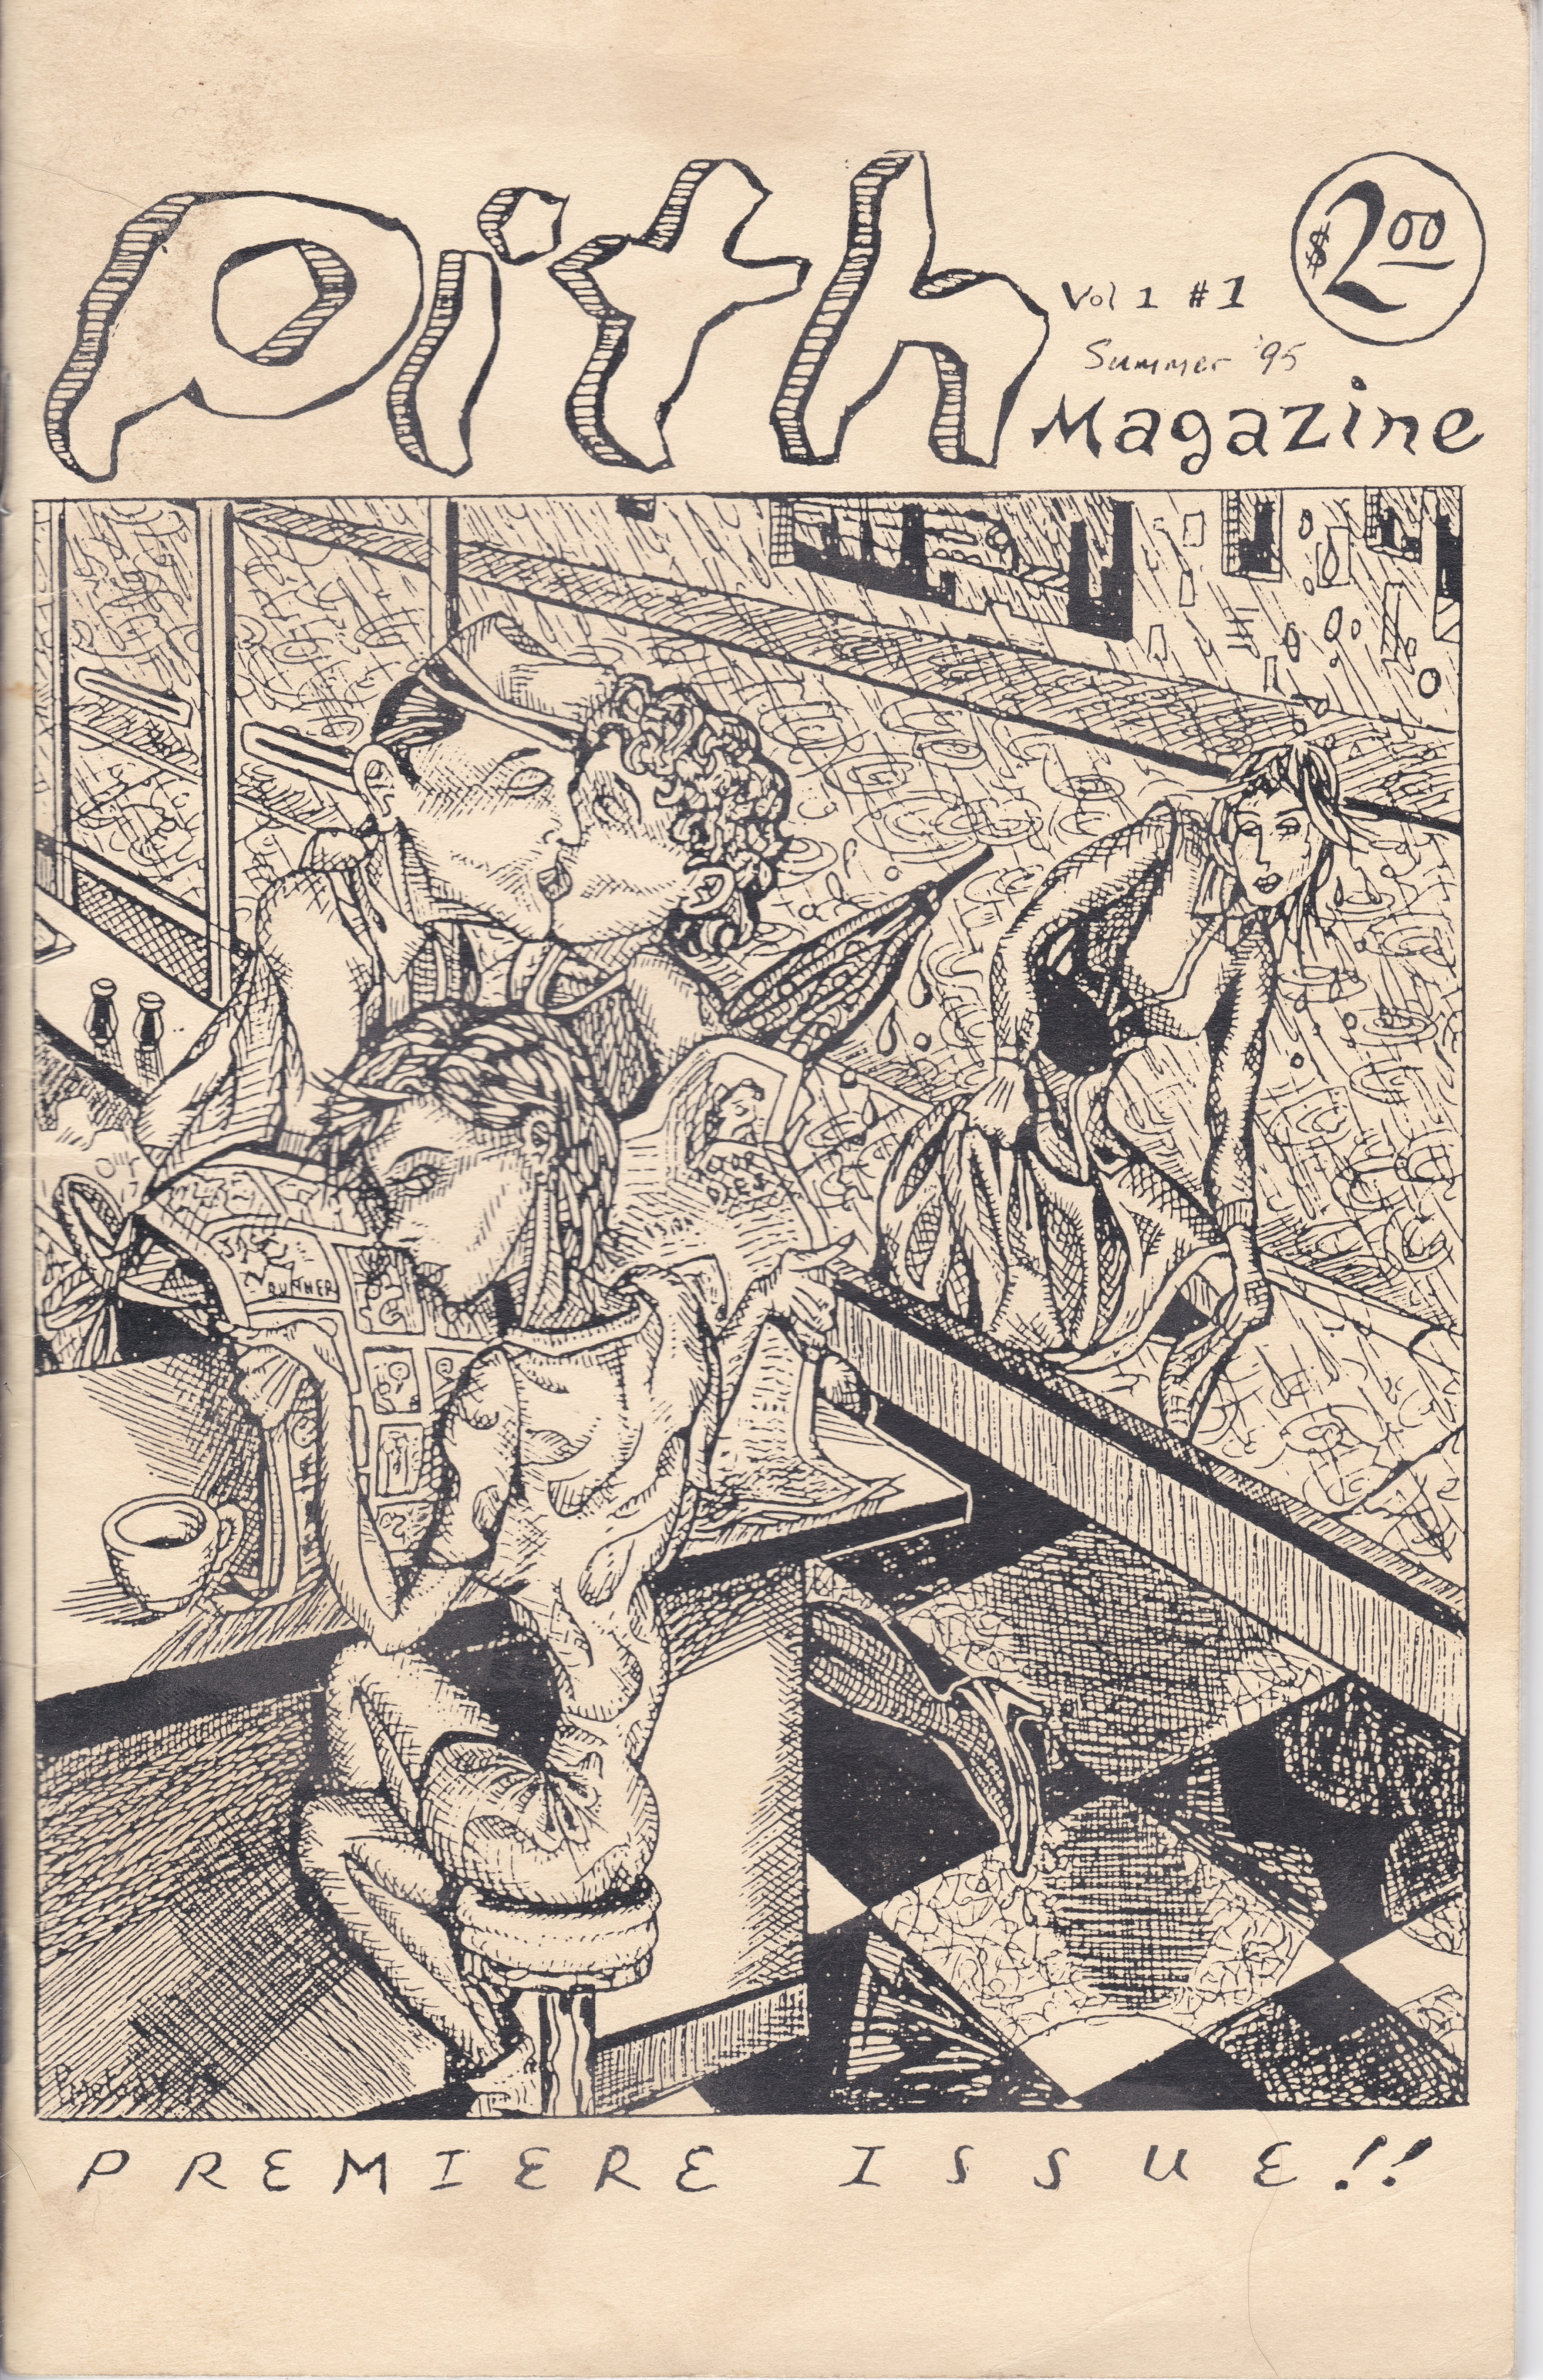 Pith #1 Front Cover
Volume 1, Issue I
Summer '95
Pat Melody's illustration of a song